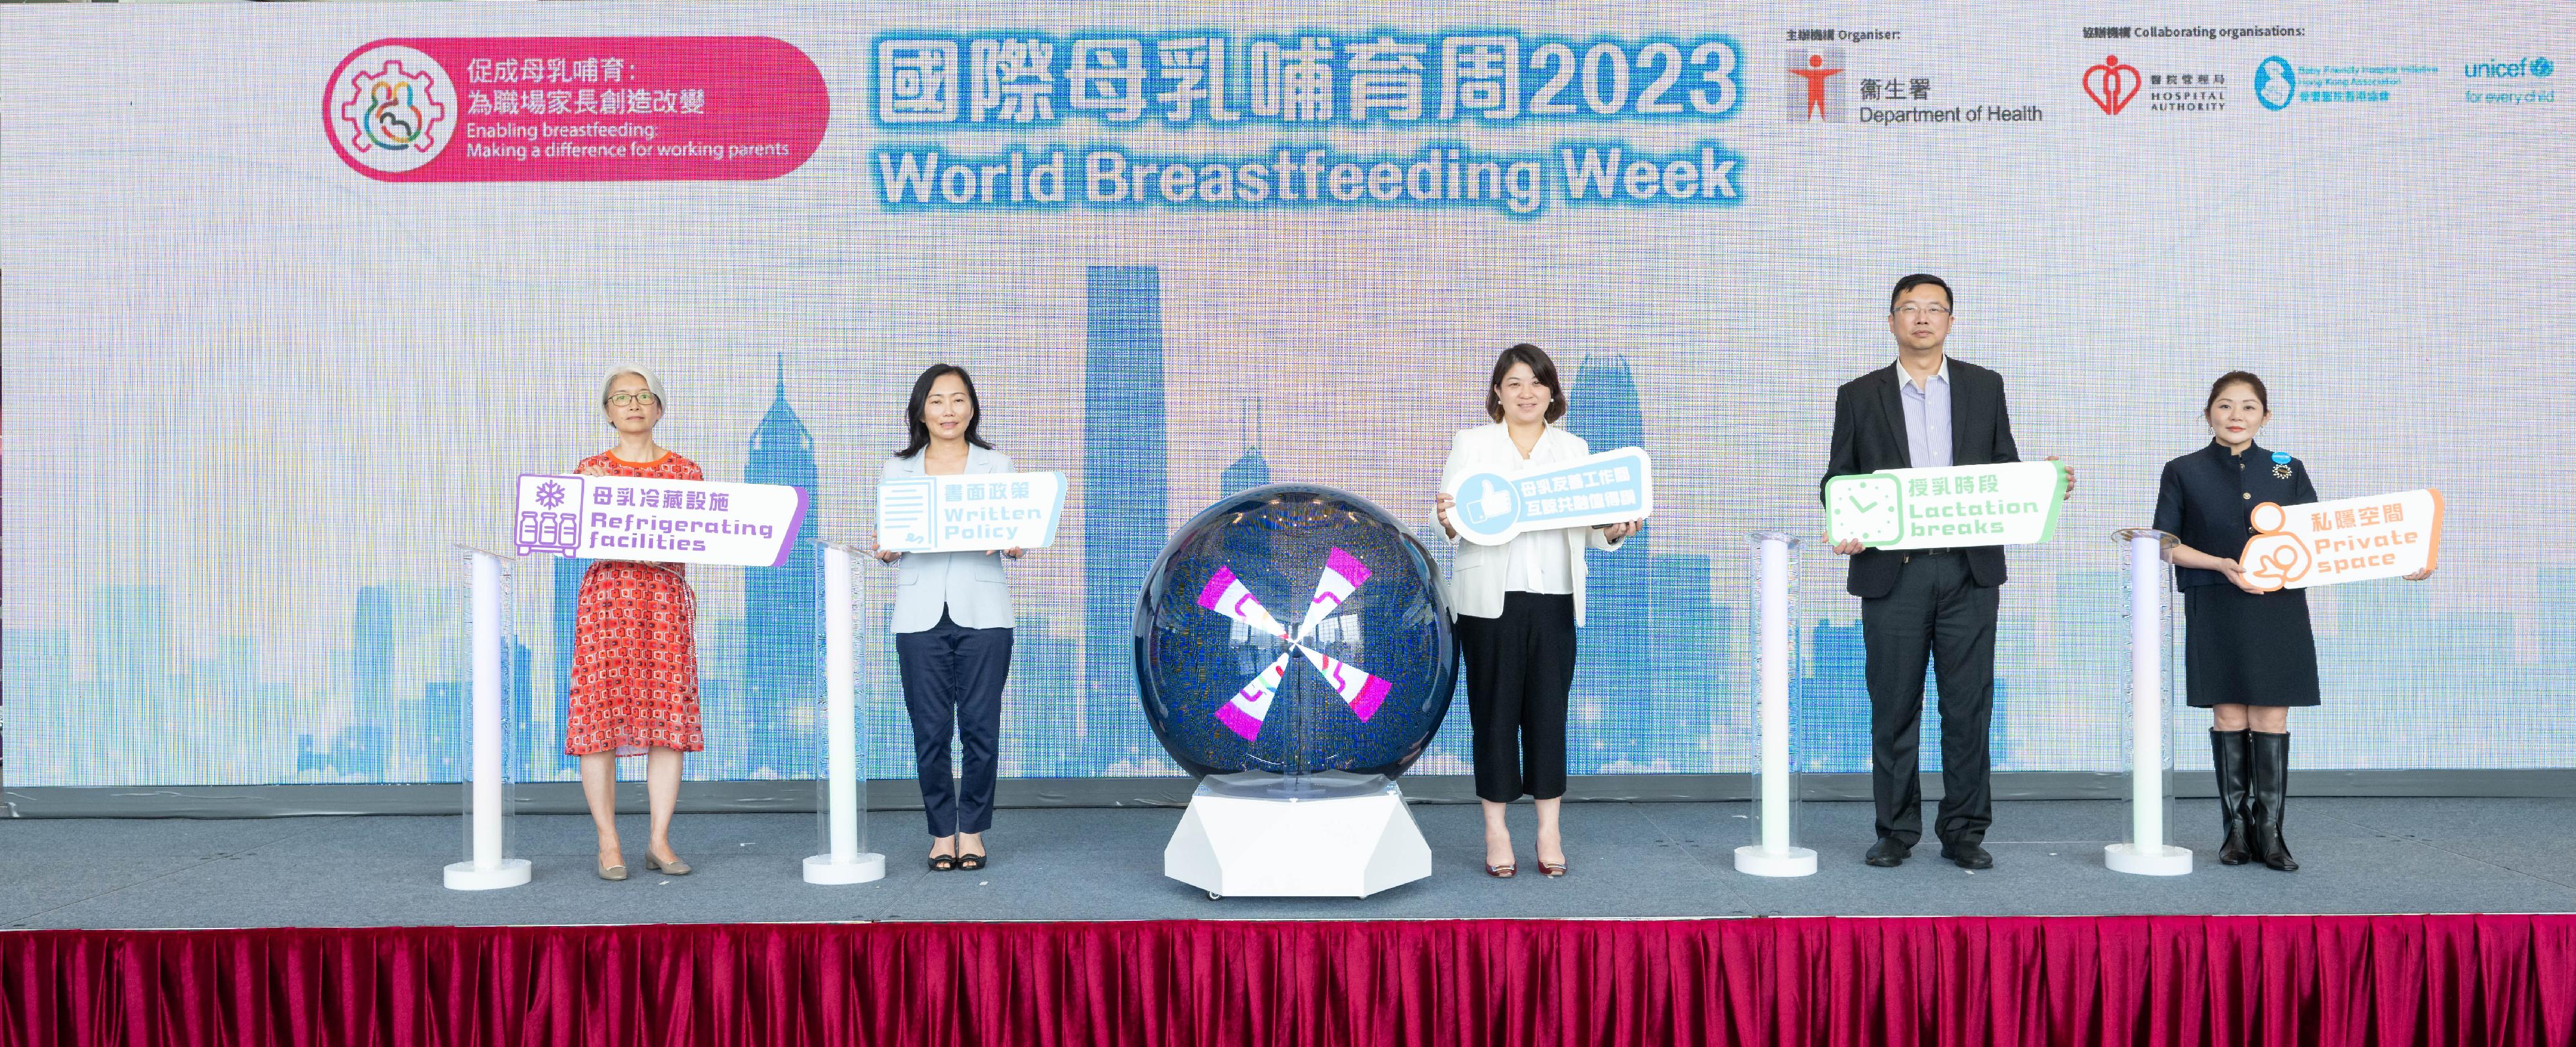 The Department of Health, in collaboration with the Hospital Authority, the Baby Friendly Hospital Initiative Hong Kong Association and the Hong Kong Committee for UNICEF, today (July 28) held a celebration event for World Breastfeeding Week 2023 and called for community collaboration to support and promote breastfeeding. Photo shows the Under Secretary for Health, Dr Libby Lee (centre), the Deputy Director of Health, Dr Teresa Li (second left), and other officiating guests at the opening ceremony.